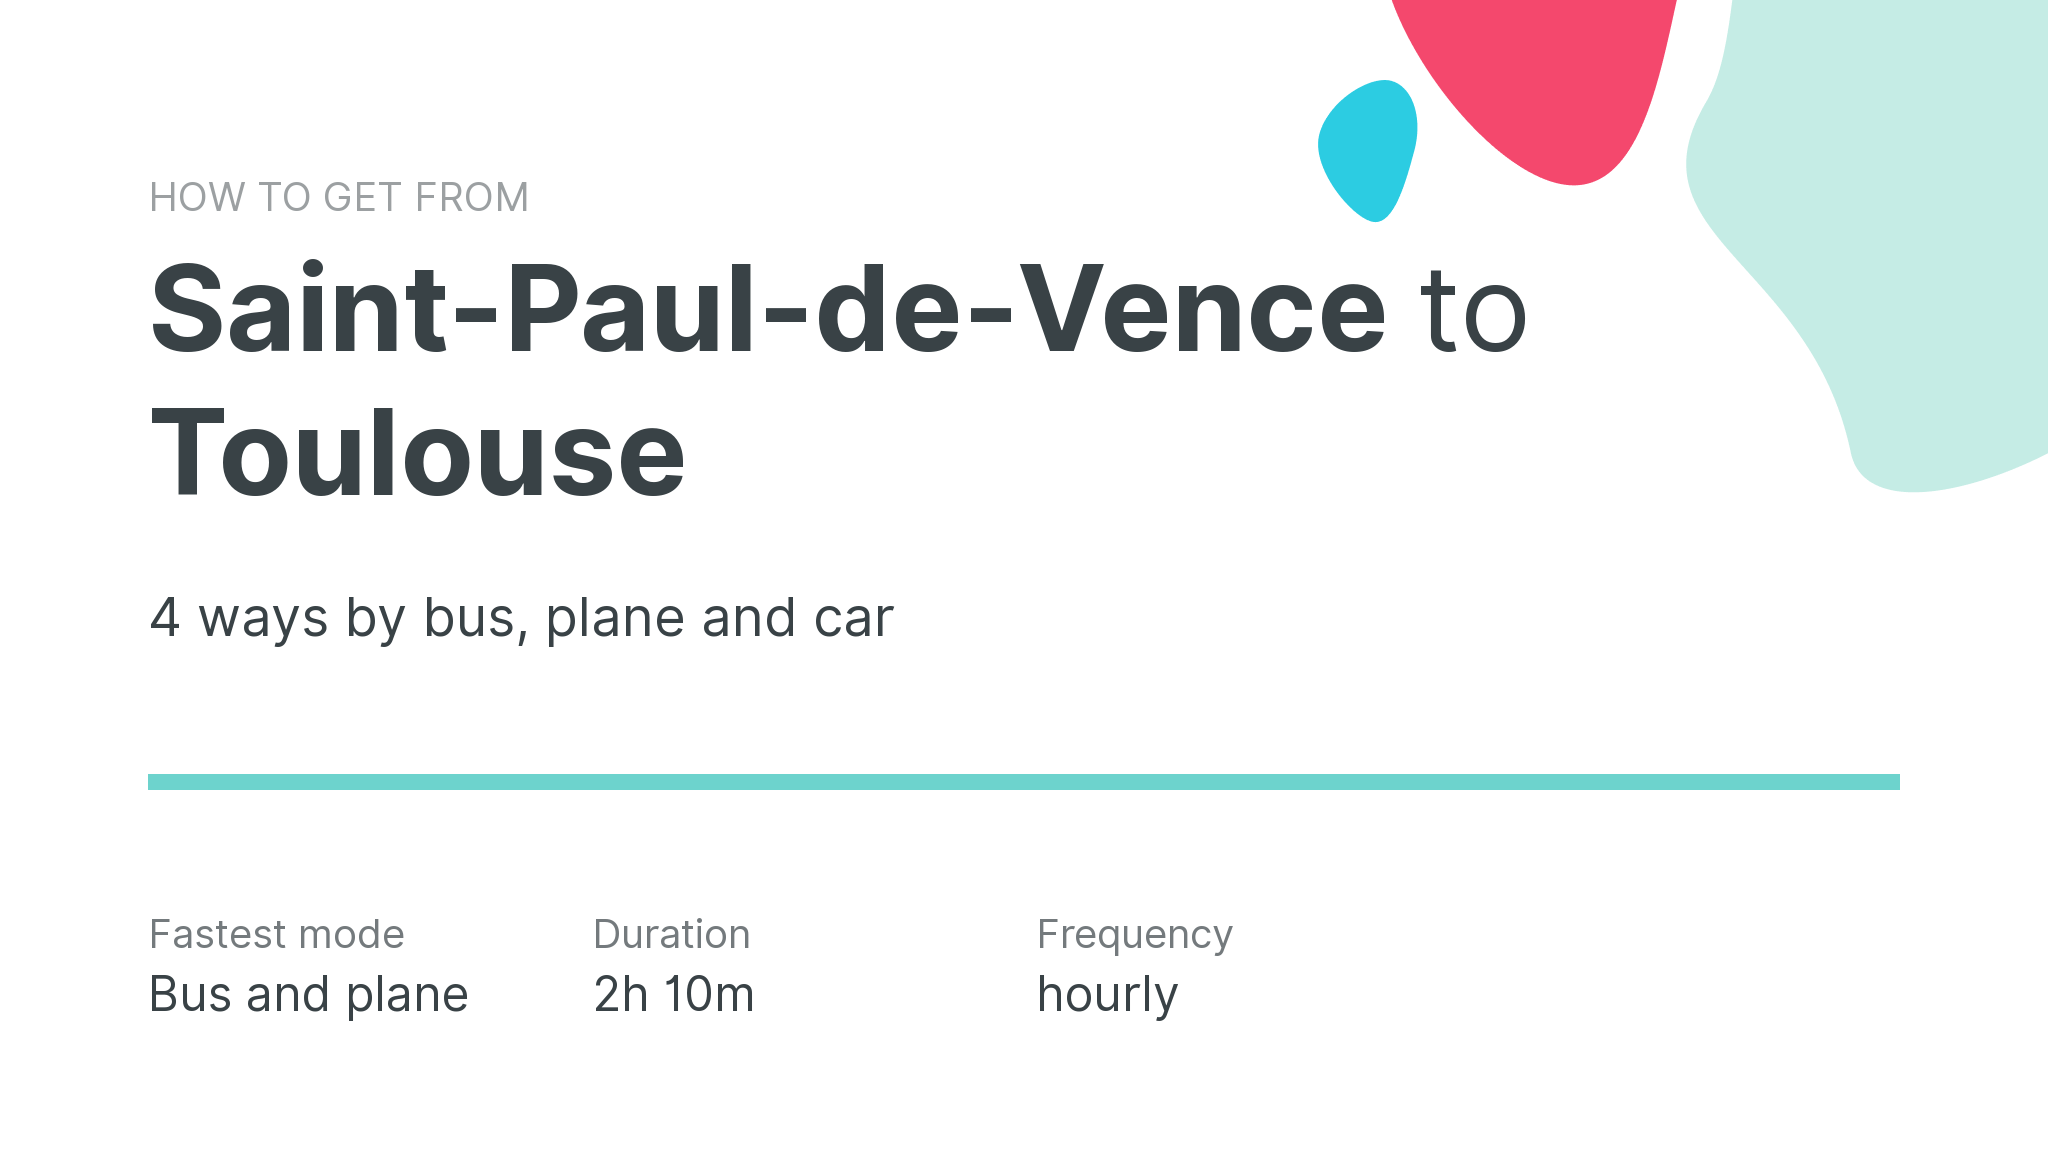 How do I get from Saint-Paul-de-Vence to Toulouse